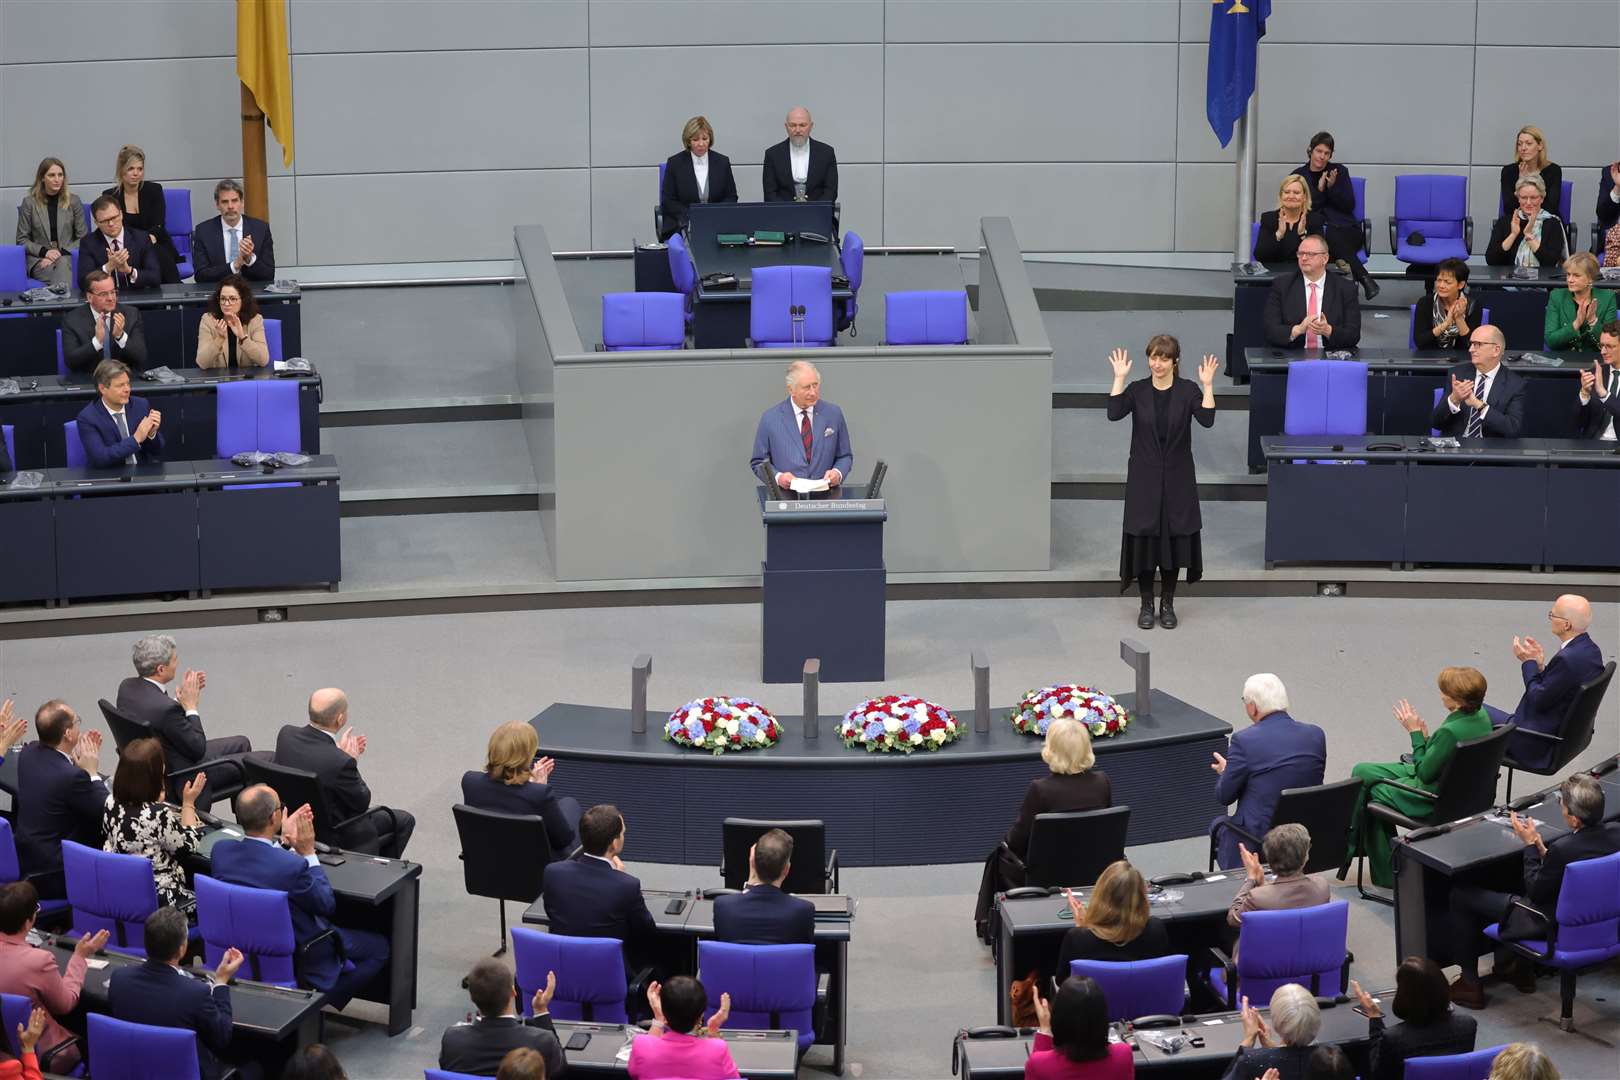 The King addresses members during a visit to the Bundestag, the German federal parliament, in Berlin (Chris Jackson/PA)